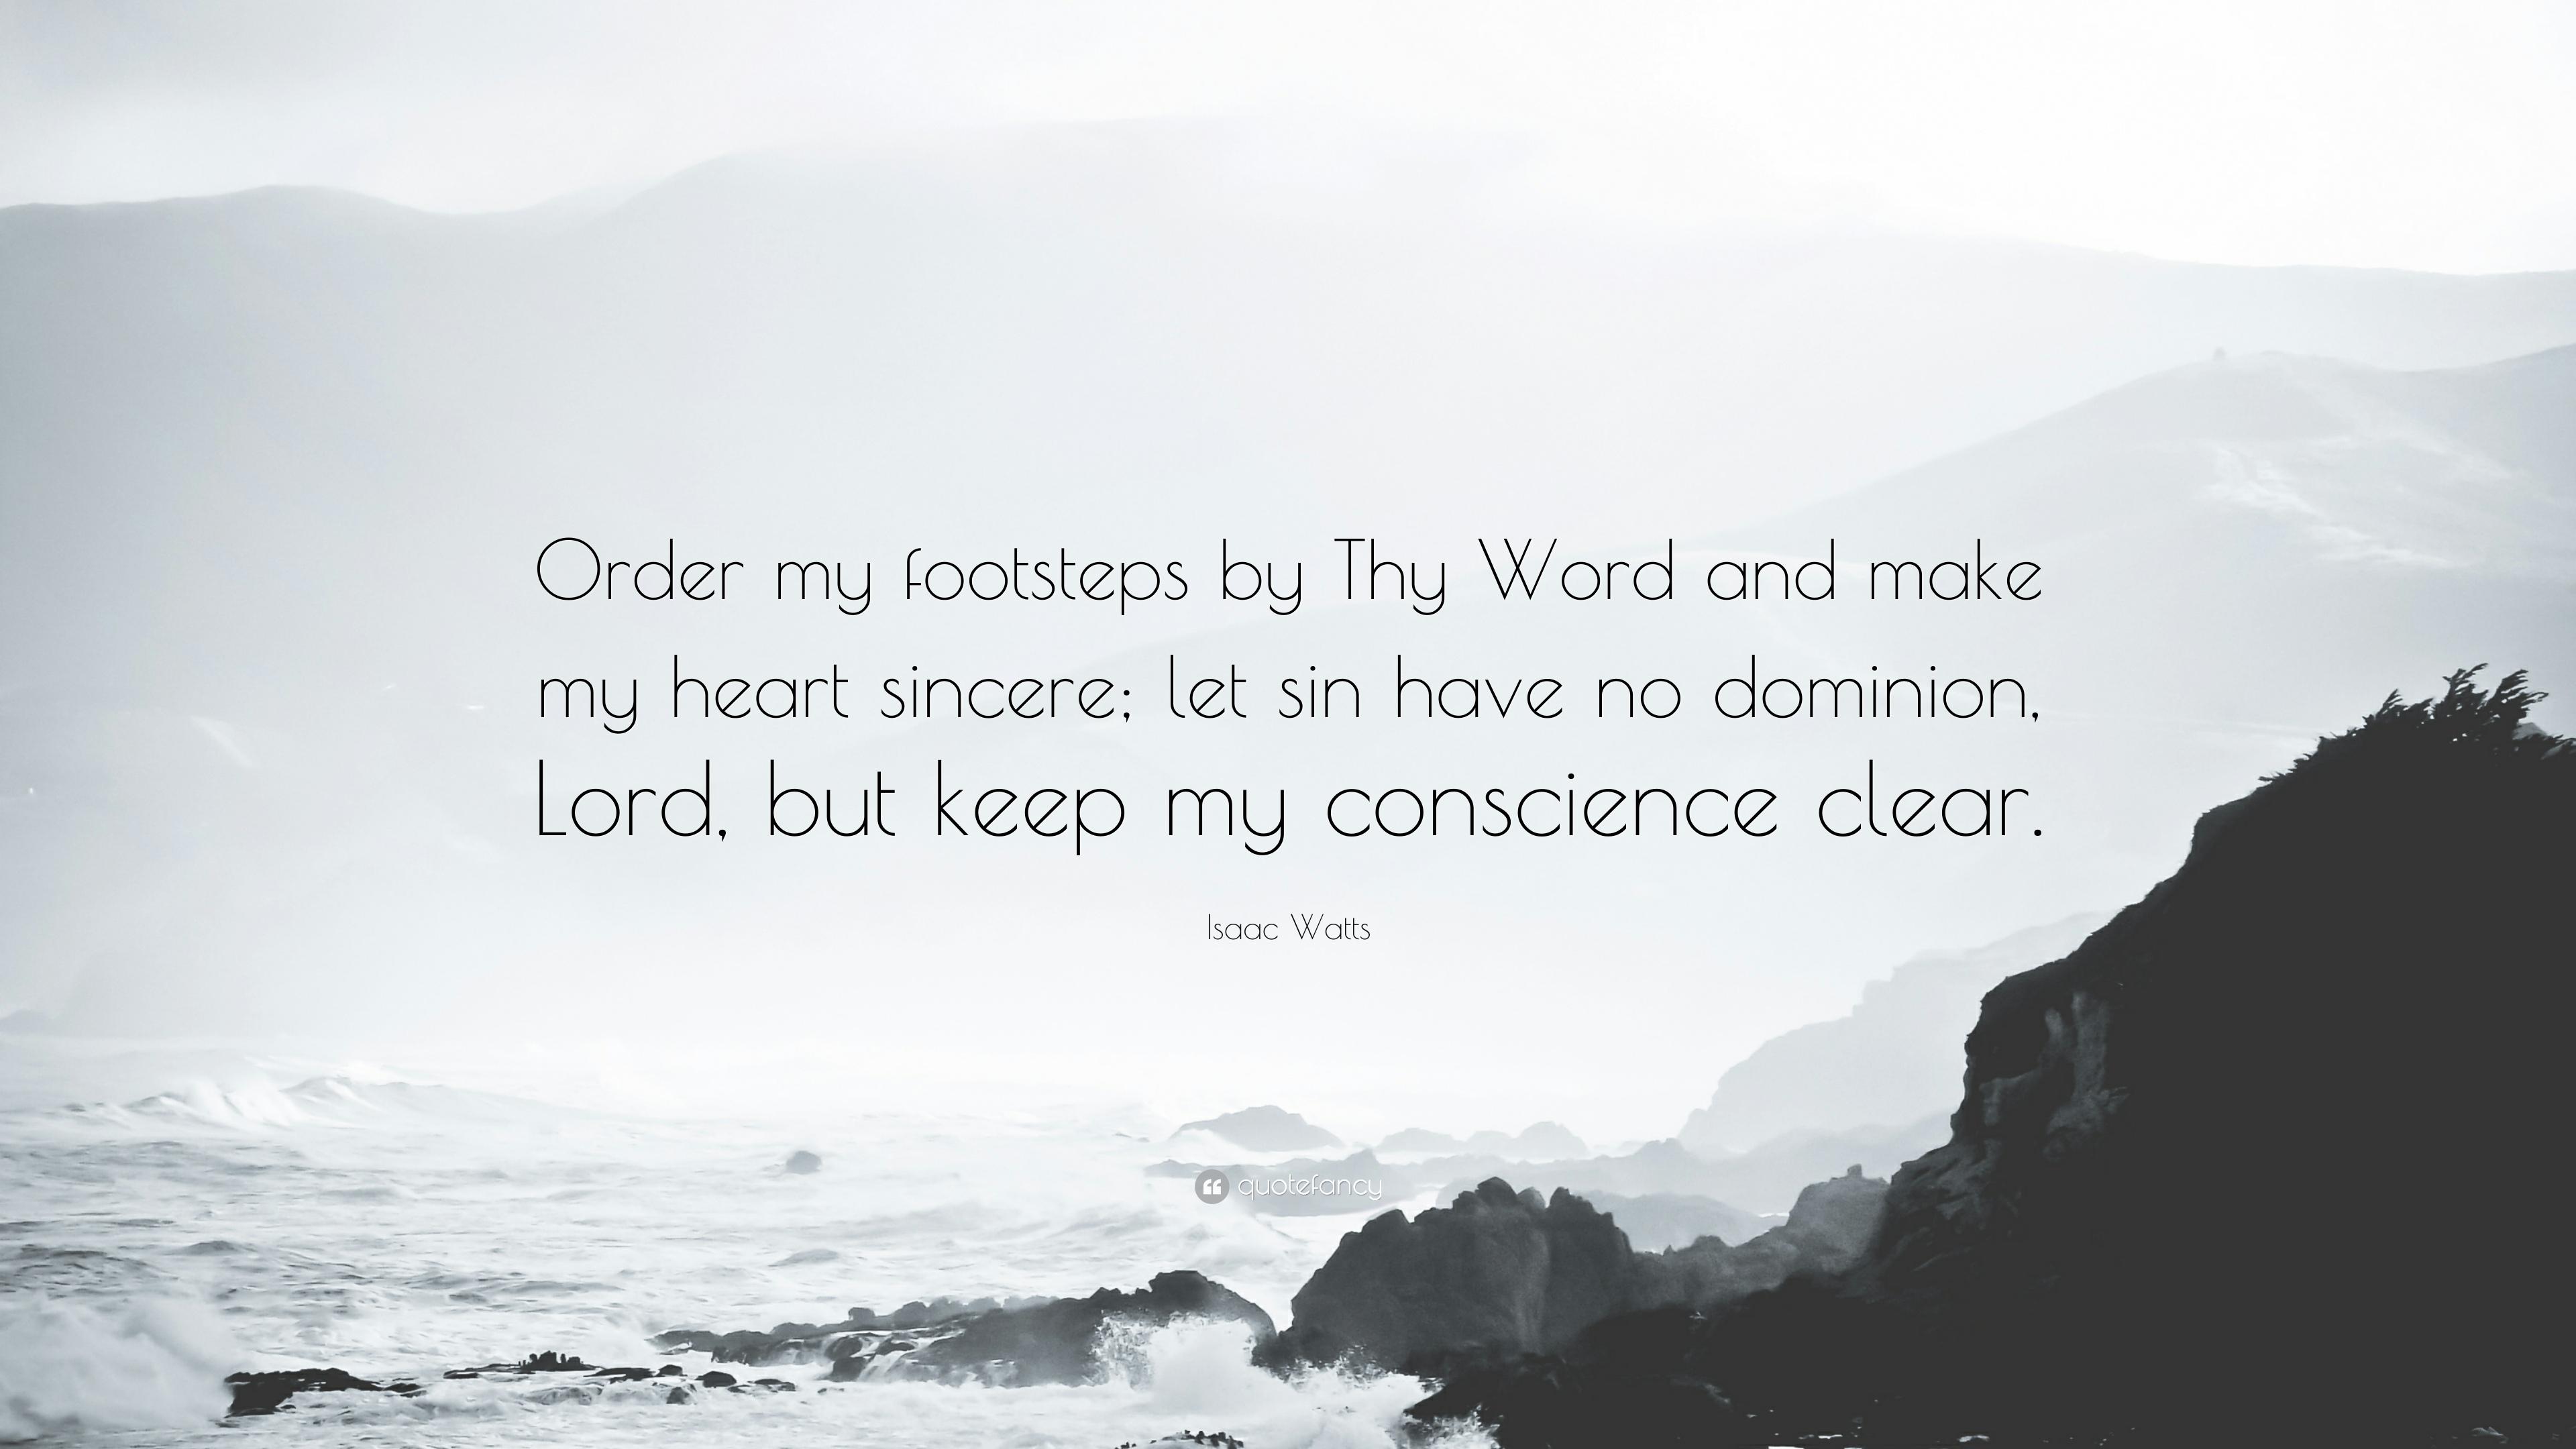 Isaac Watts Quote: “Order my footsteps by Thy Word and make